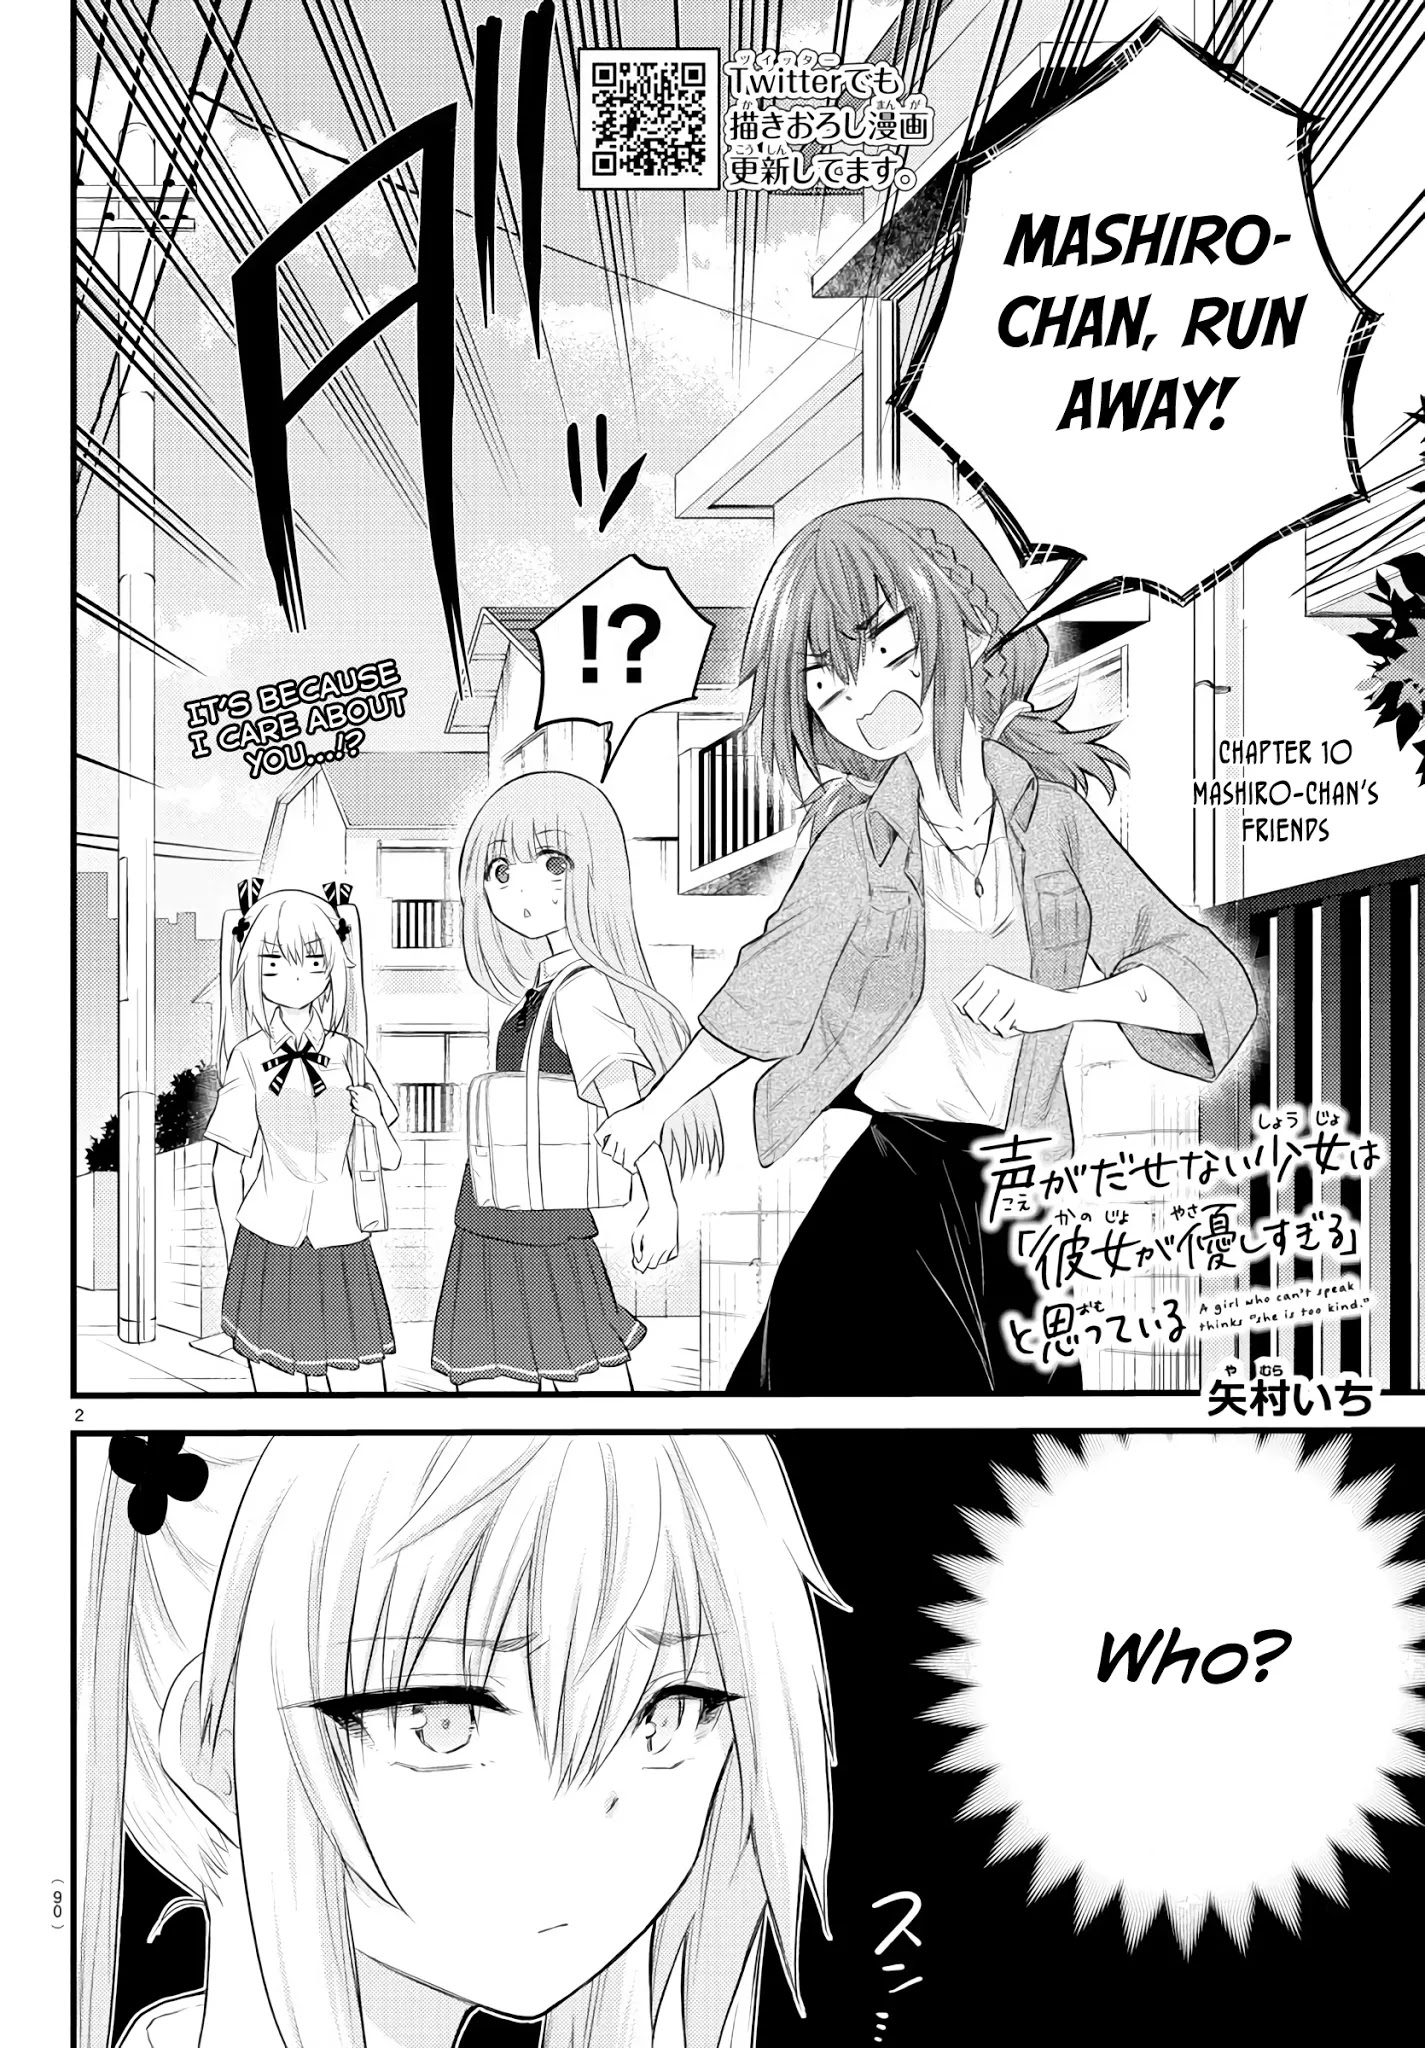 The Mute Girl And Her New Friend (Serialization) Chapter 10: Mashiro-Chan's Friends - Picture 3